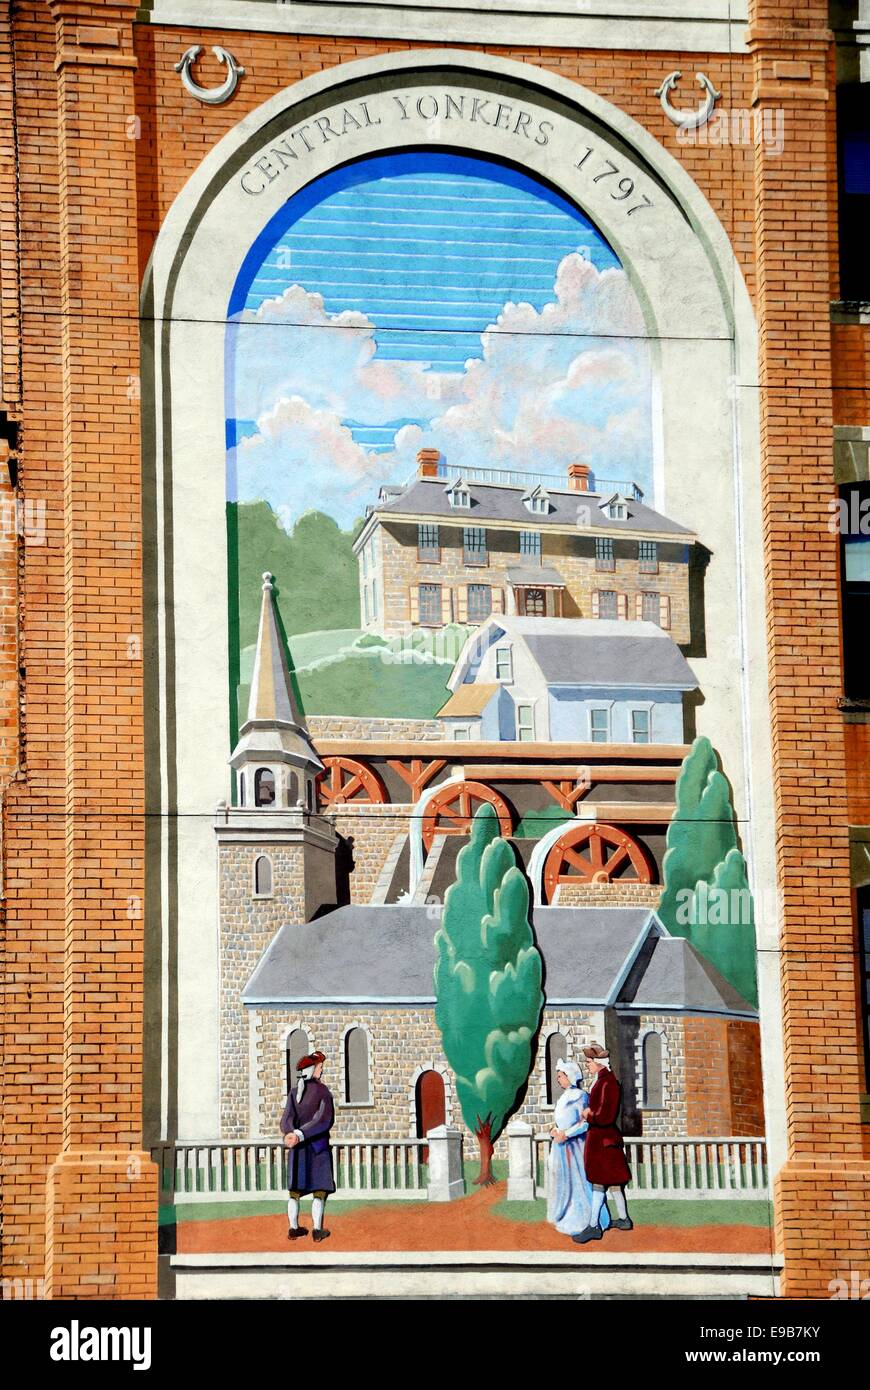 YONKERS, NY: Trompe l'oeil painting of Central Yonkers circa 1797 with Philipse Hall Manor at the top decorates a building wall Stock Photo